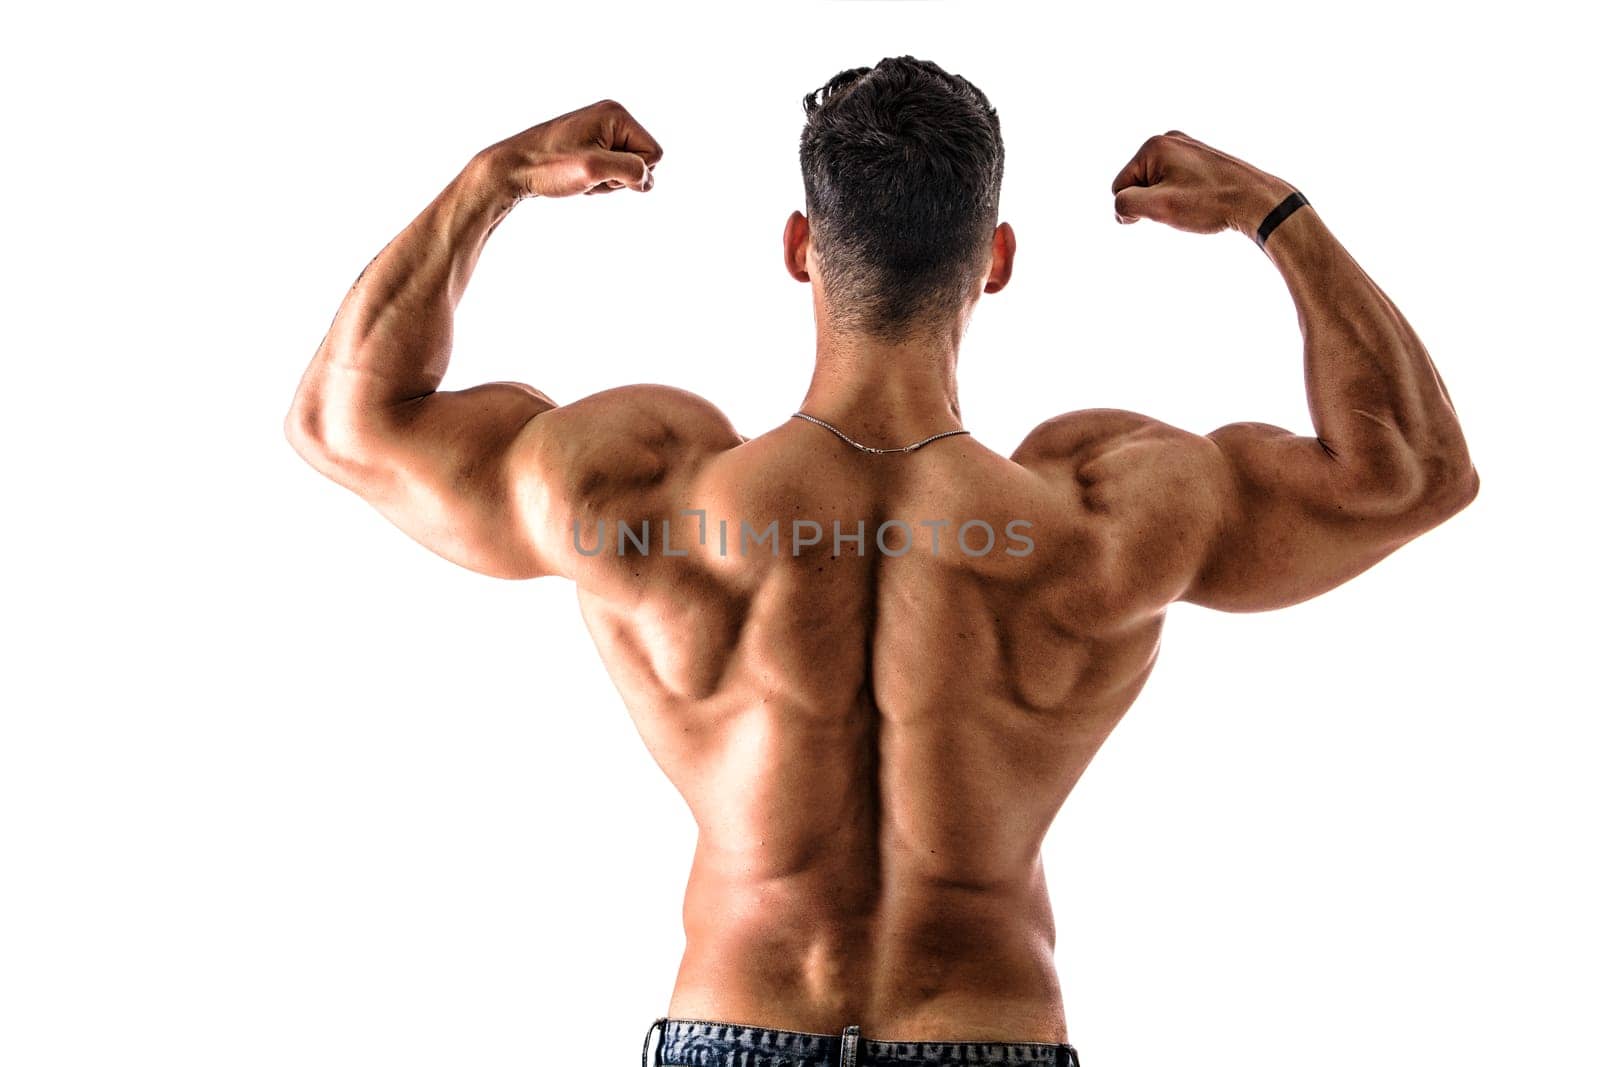 A man flexing his muscles in front of a white background